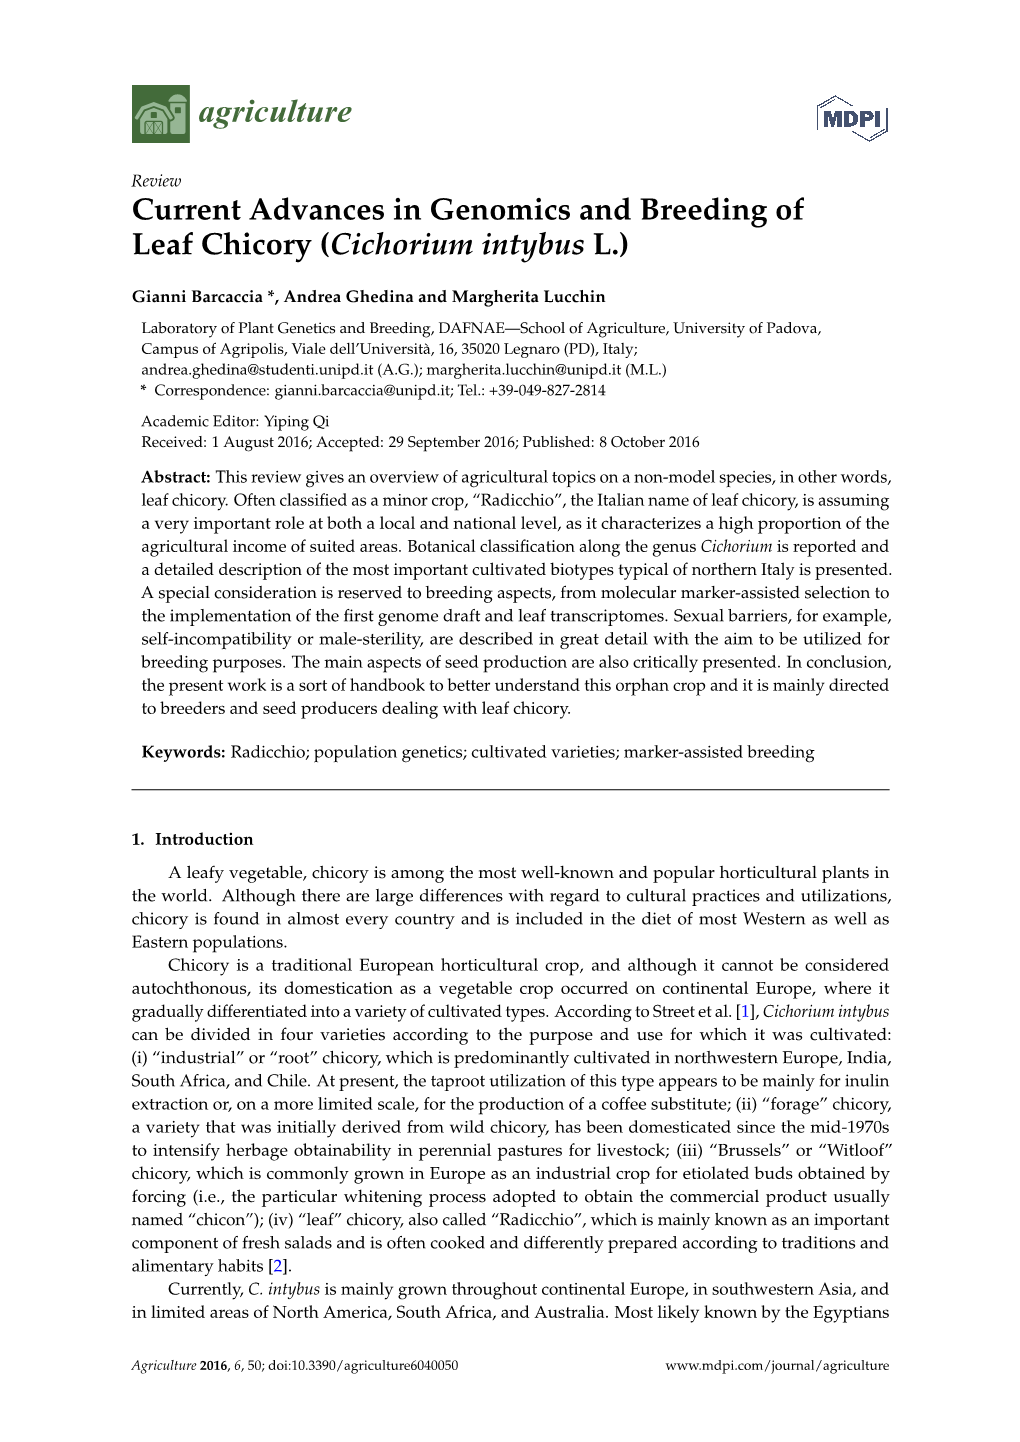 Current Advances in Genomics and Breeding of Leaf Chicory (Cichorium Intybus L.)